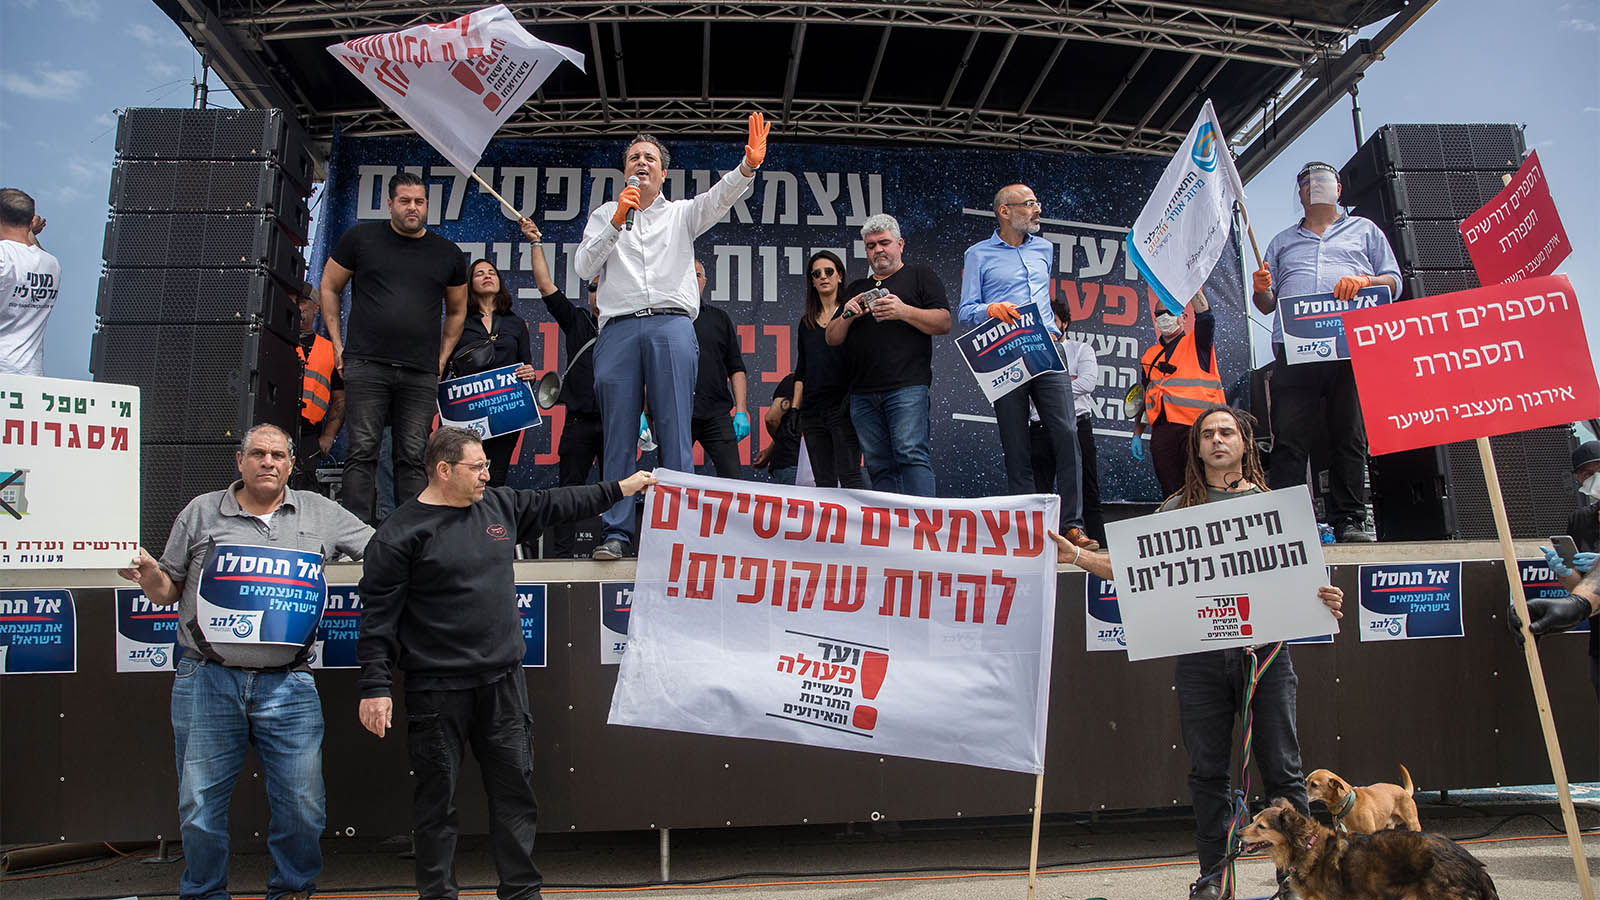 Self-employed workers protesting in front of the Knesset, March 30 (Photograph: Jonathan Zindel/Flash90)